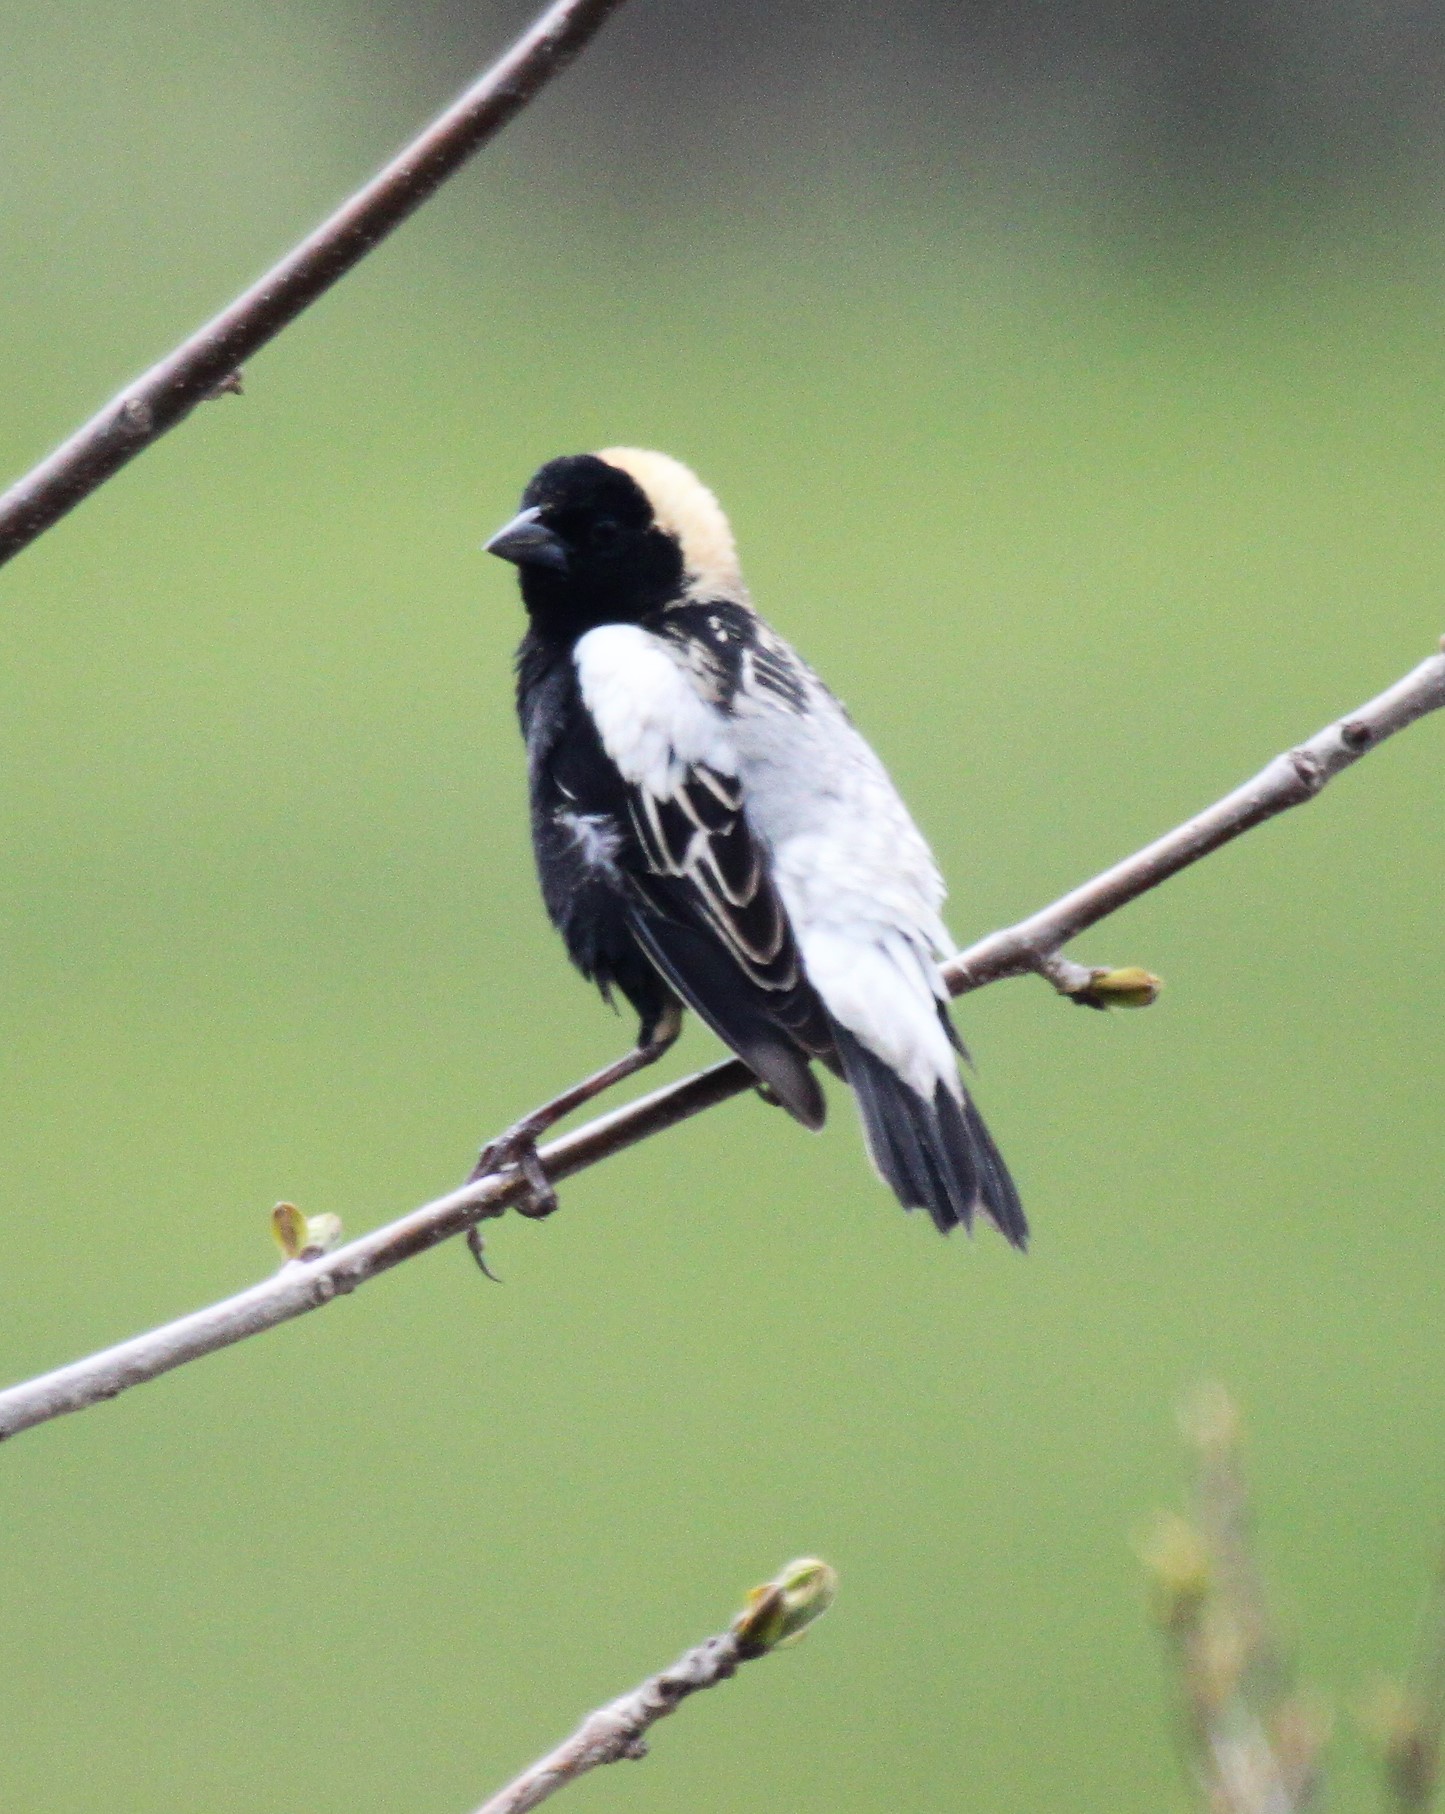 Male bobolink perched on tree branch